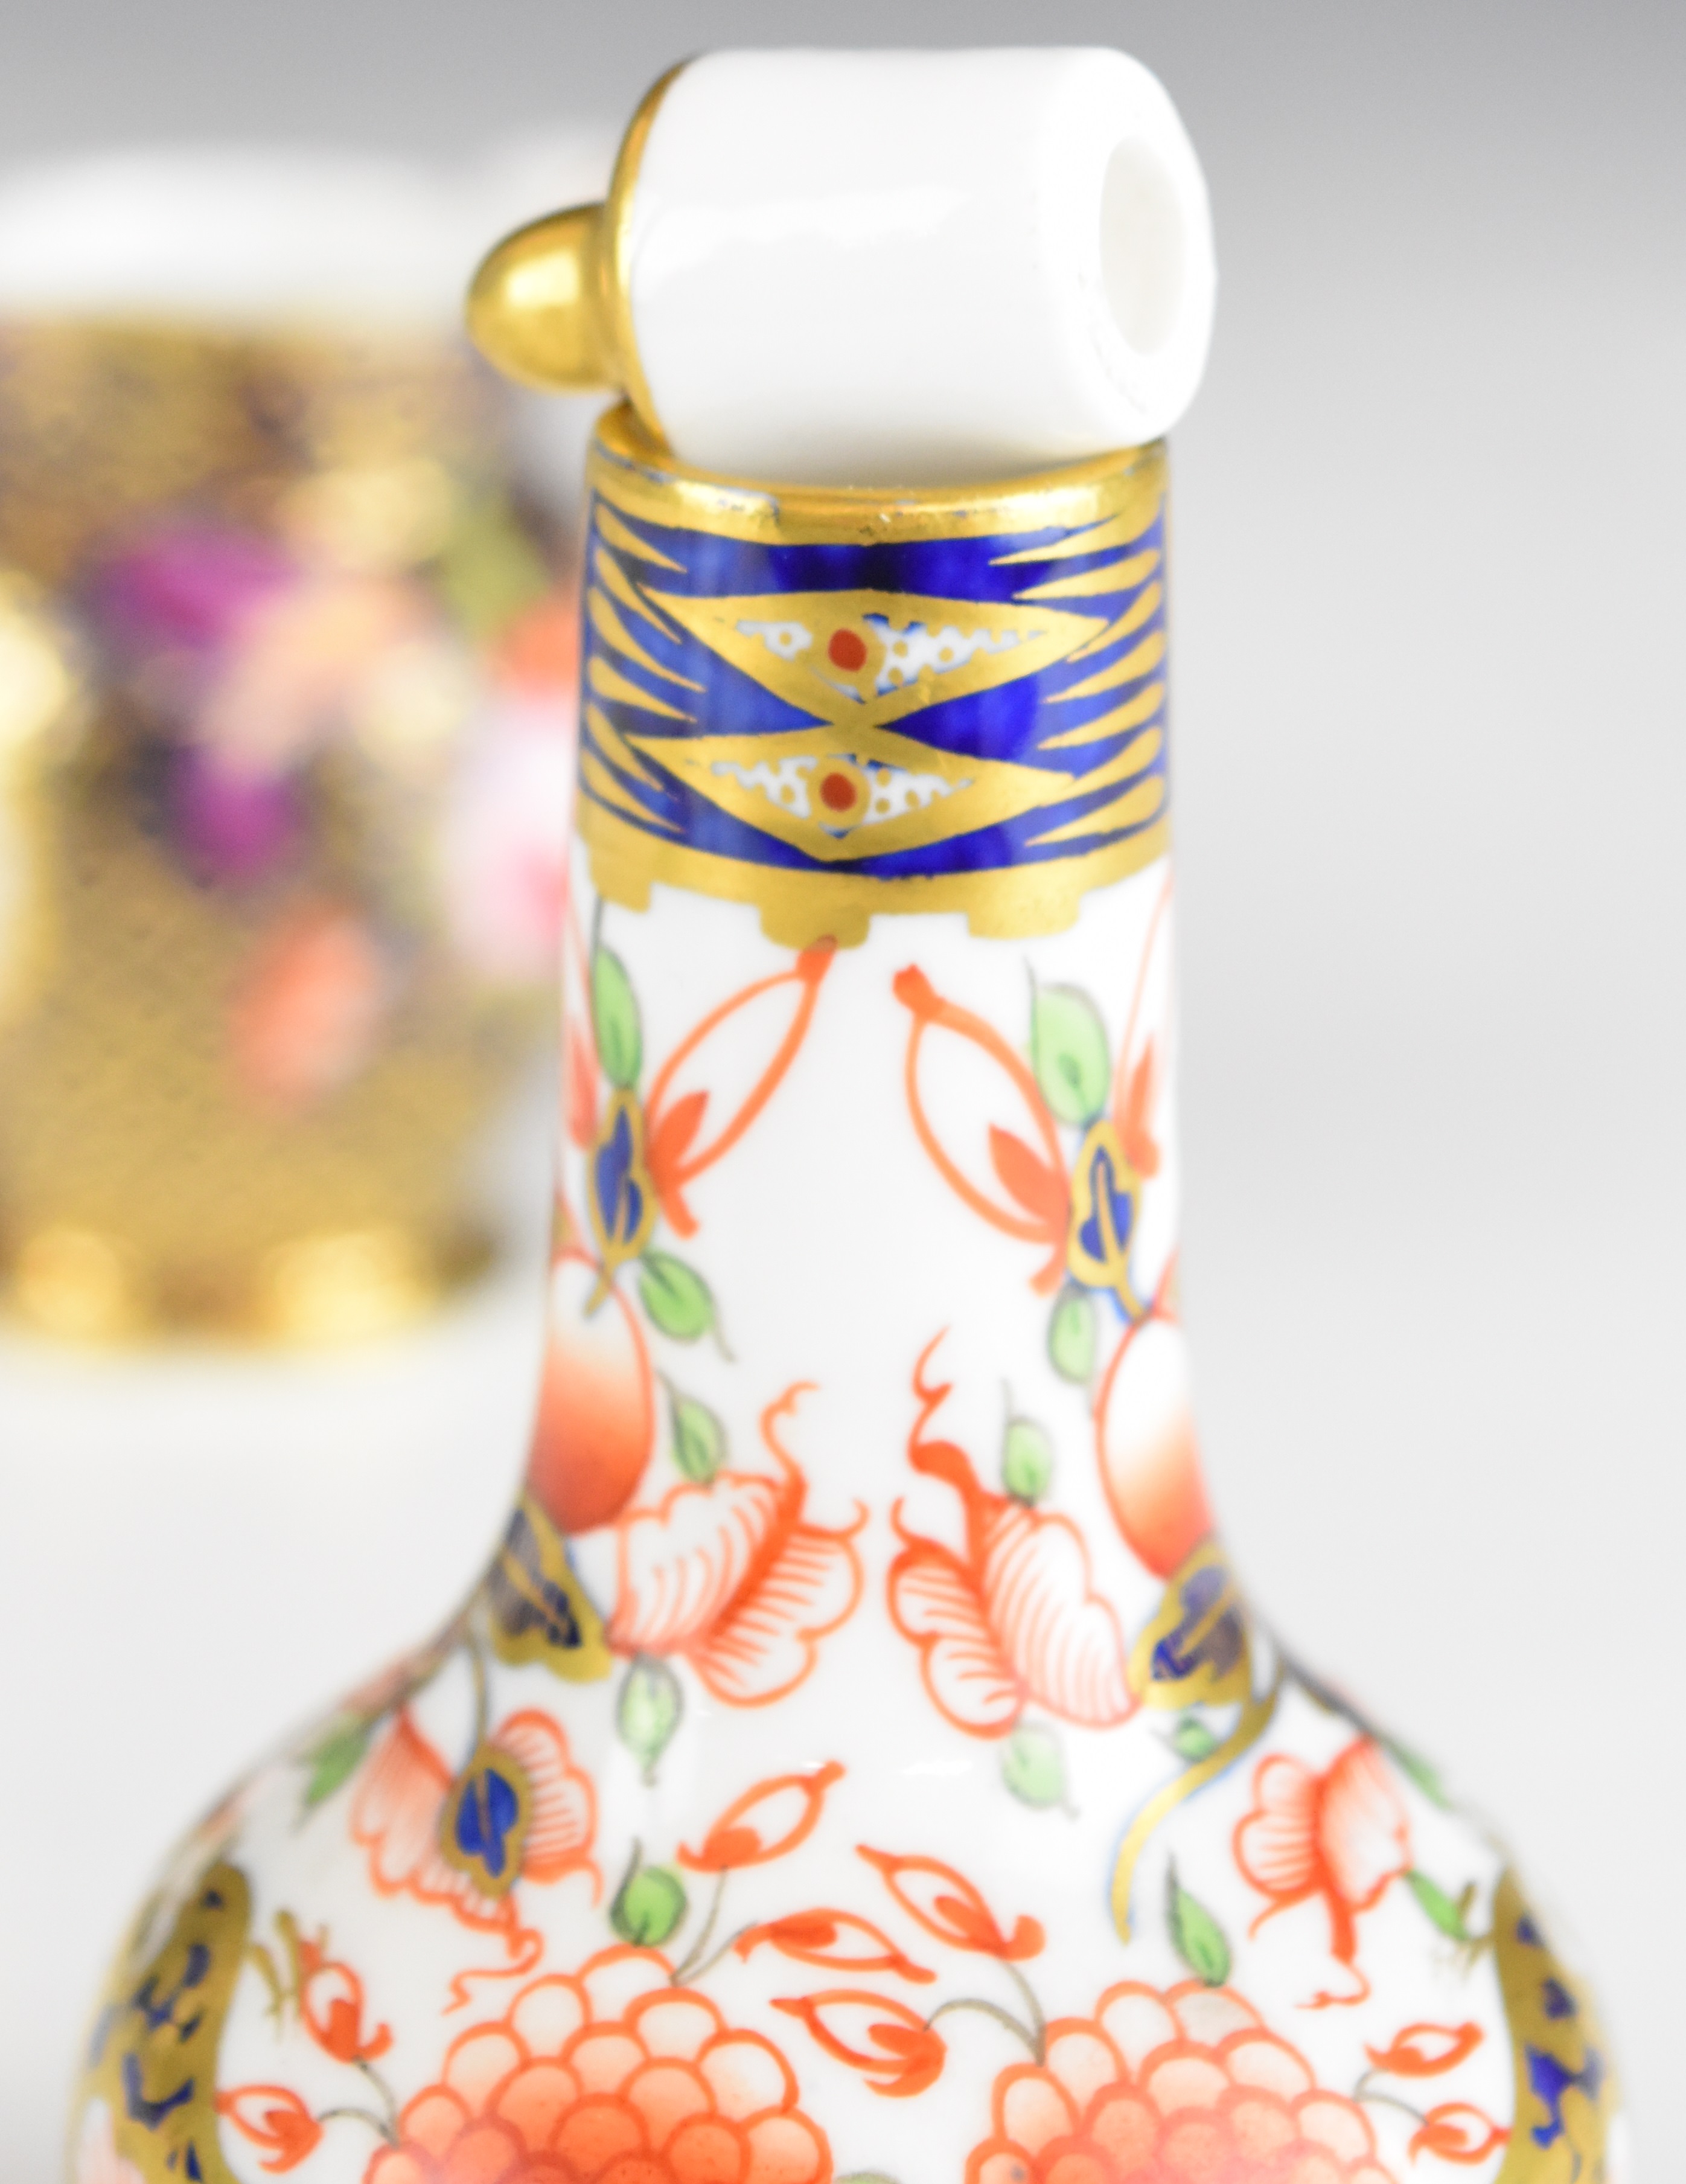 Crown Derby Imari and Davenport covered scent / perfume bottles, Coalport miniature jug with - Image 4 of 14